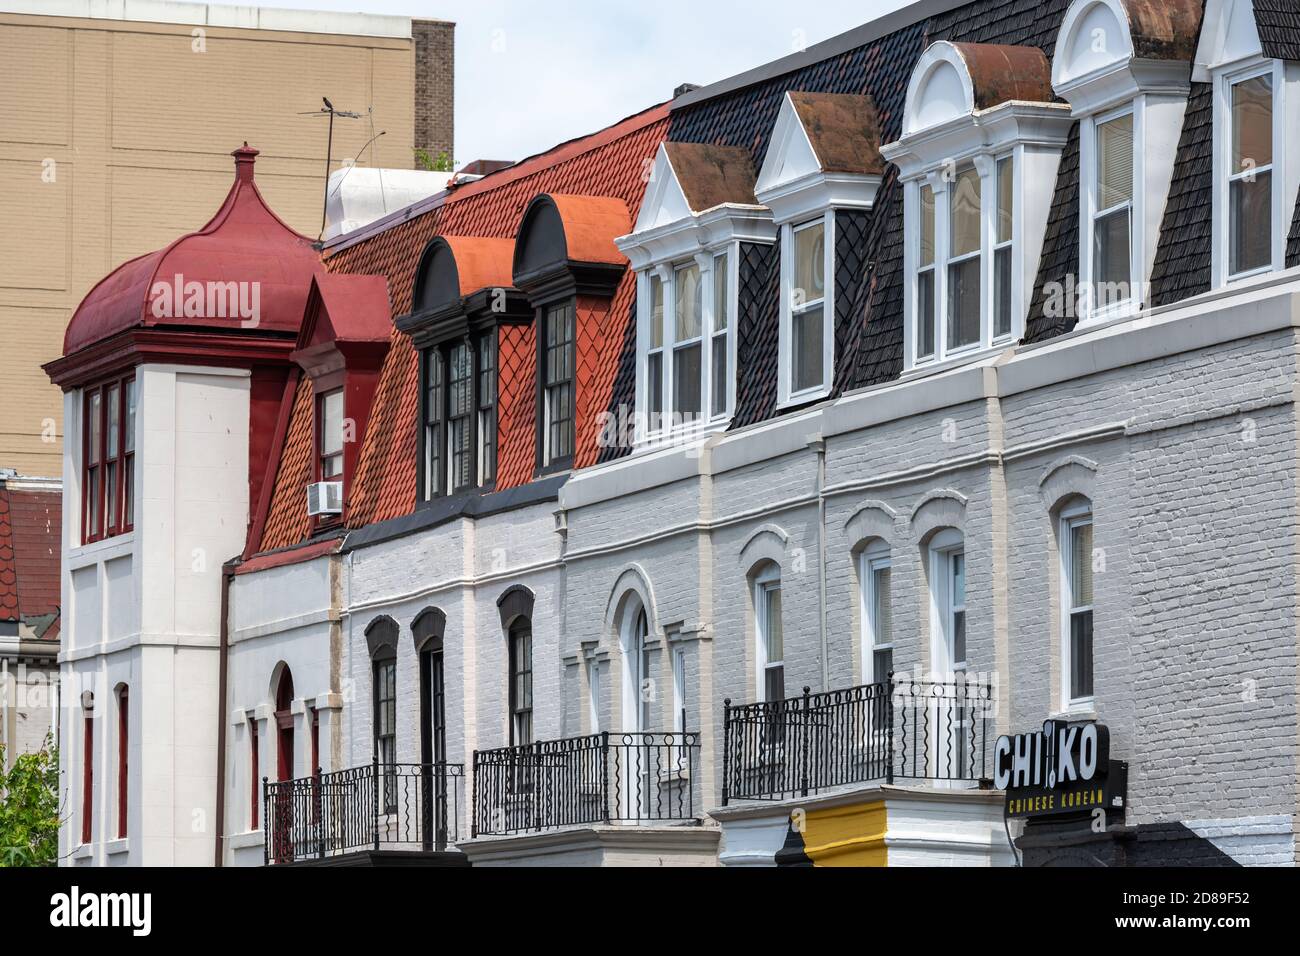 Contrasting window styles decorate a row of houses in P St NW in Washington DC Stock Photo